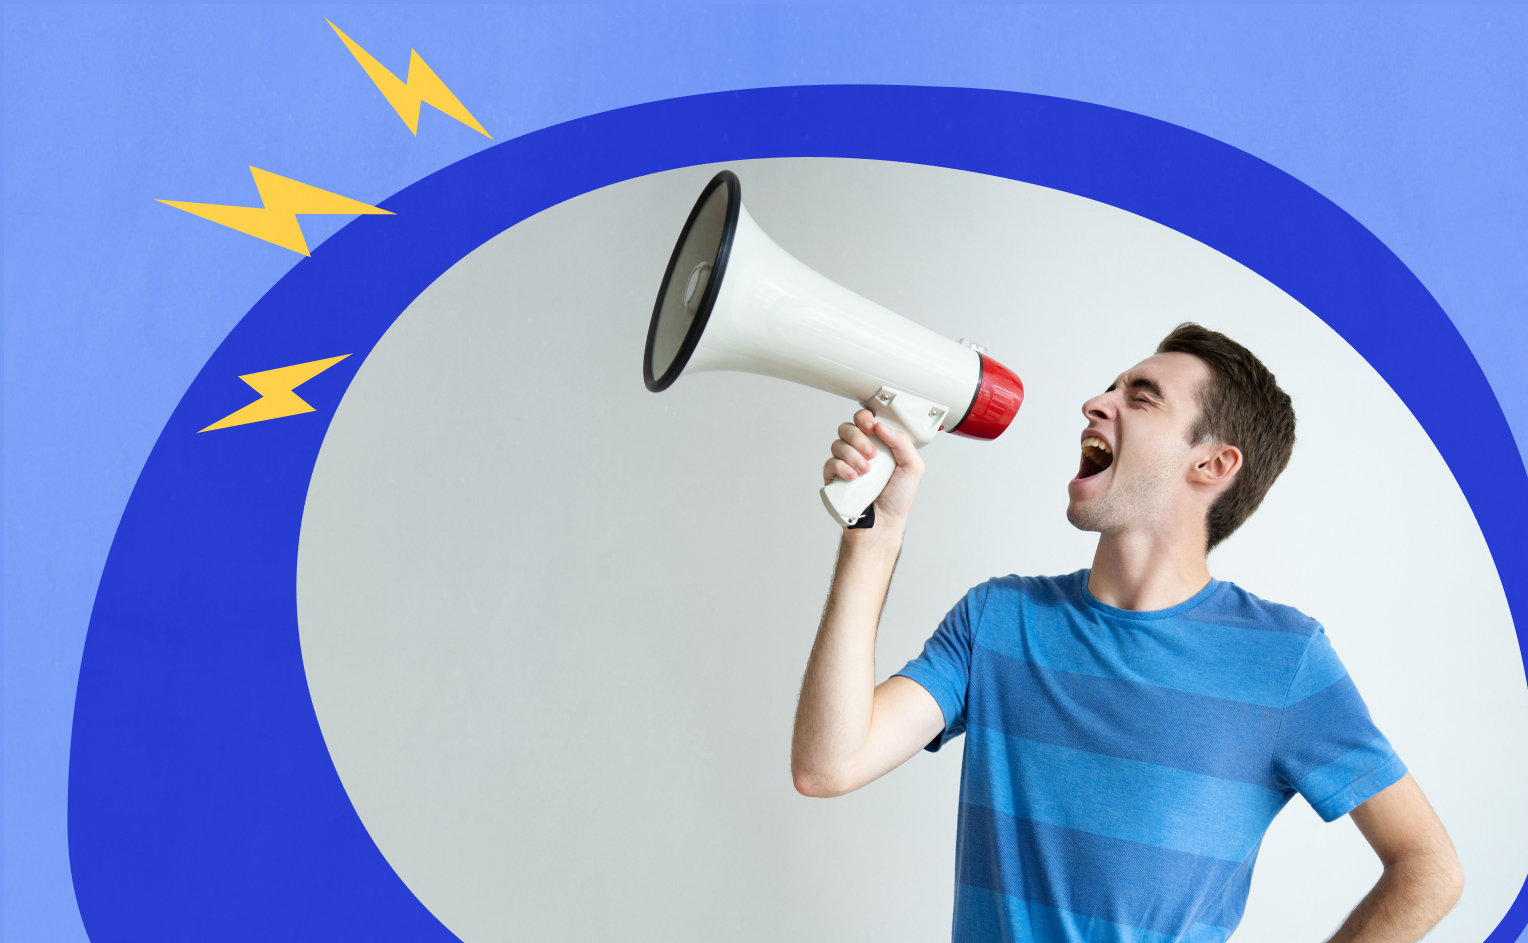 A man shouting into a megaphone. Picture is surrounded by a blue graphic background